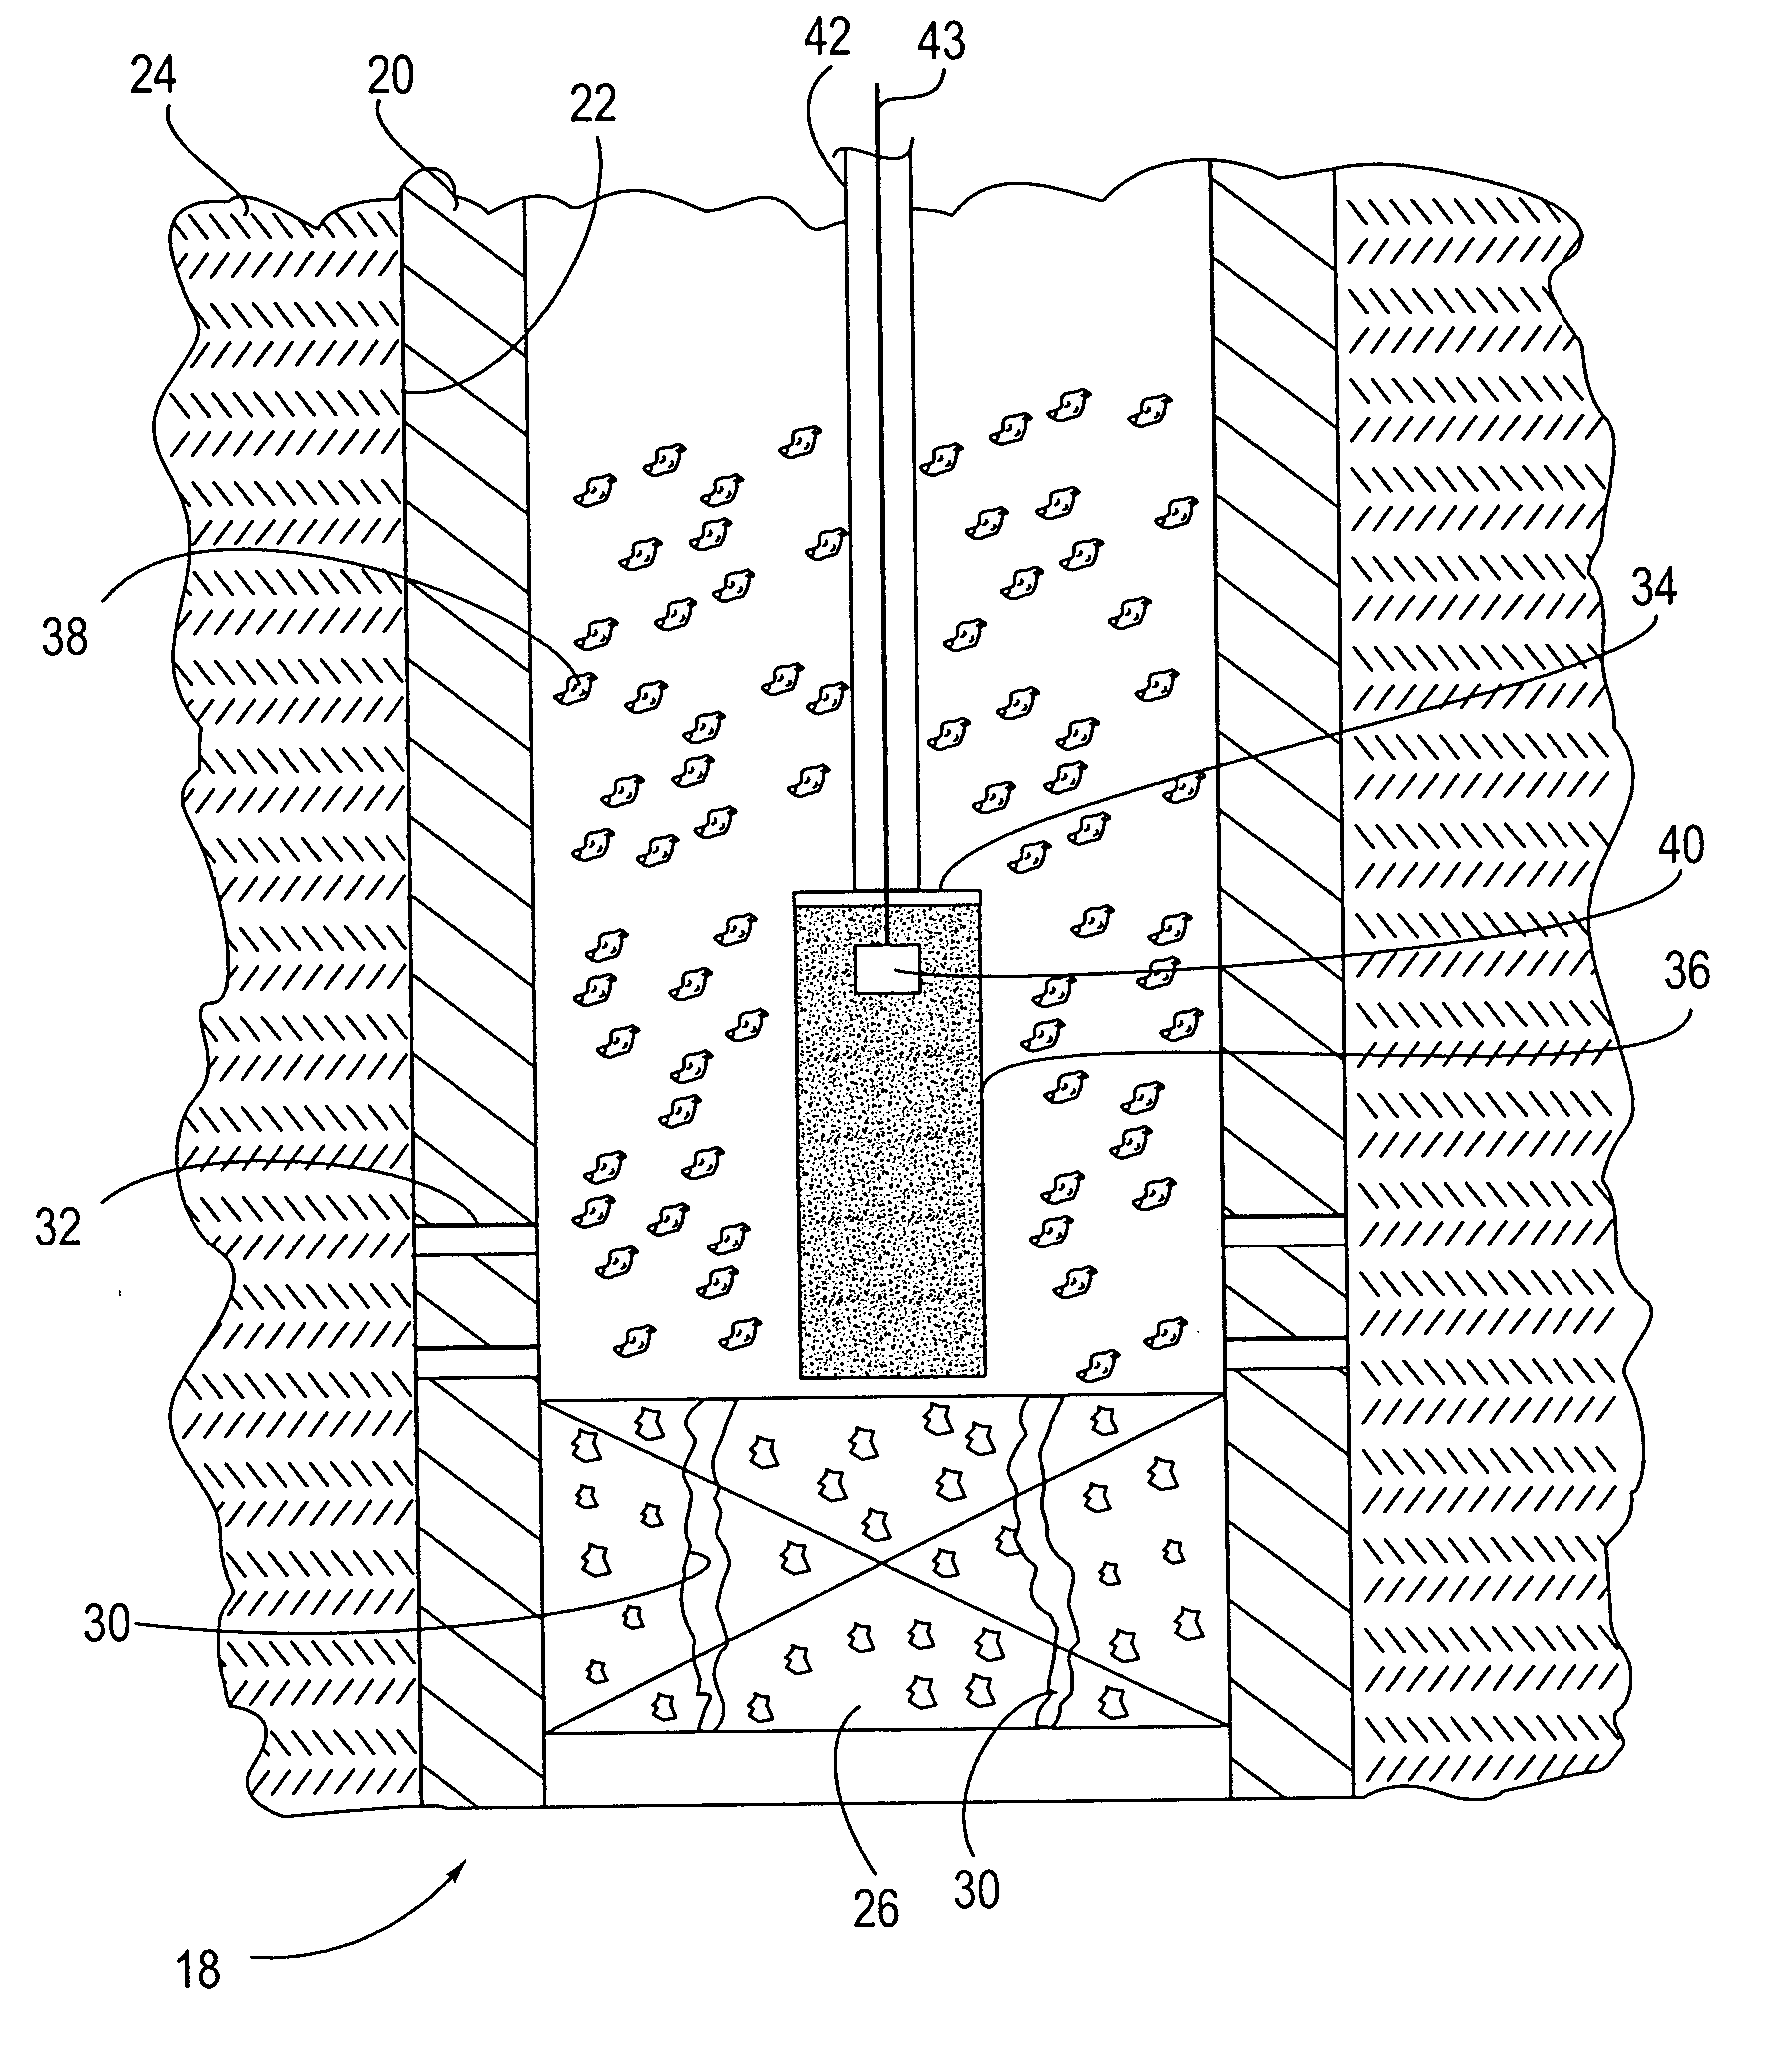 Method and apparatus for repair of wells utilizing meltable repair materials and exothermic reactants as heating agents